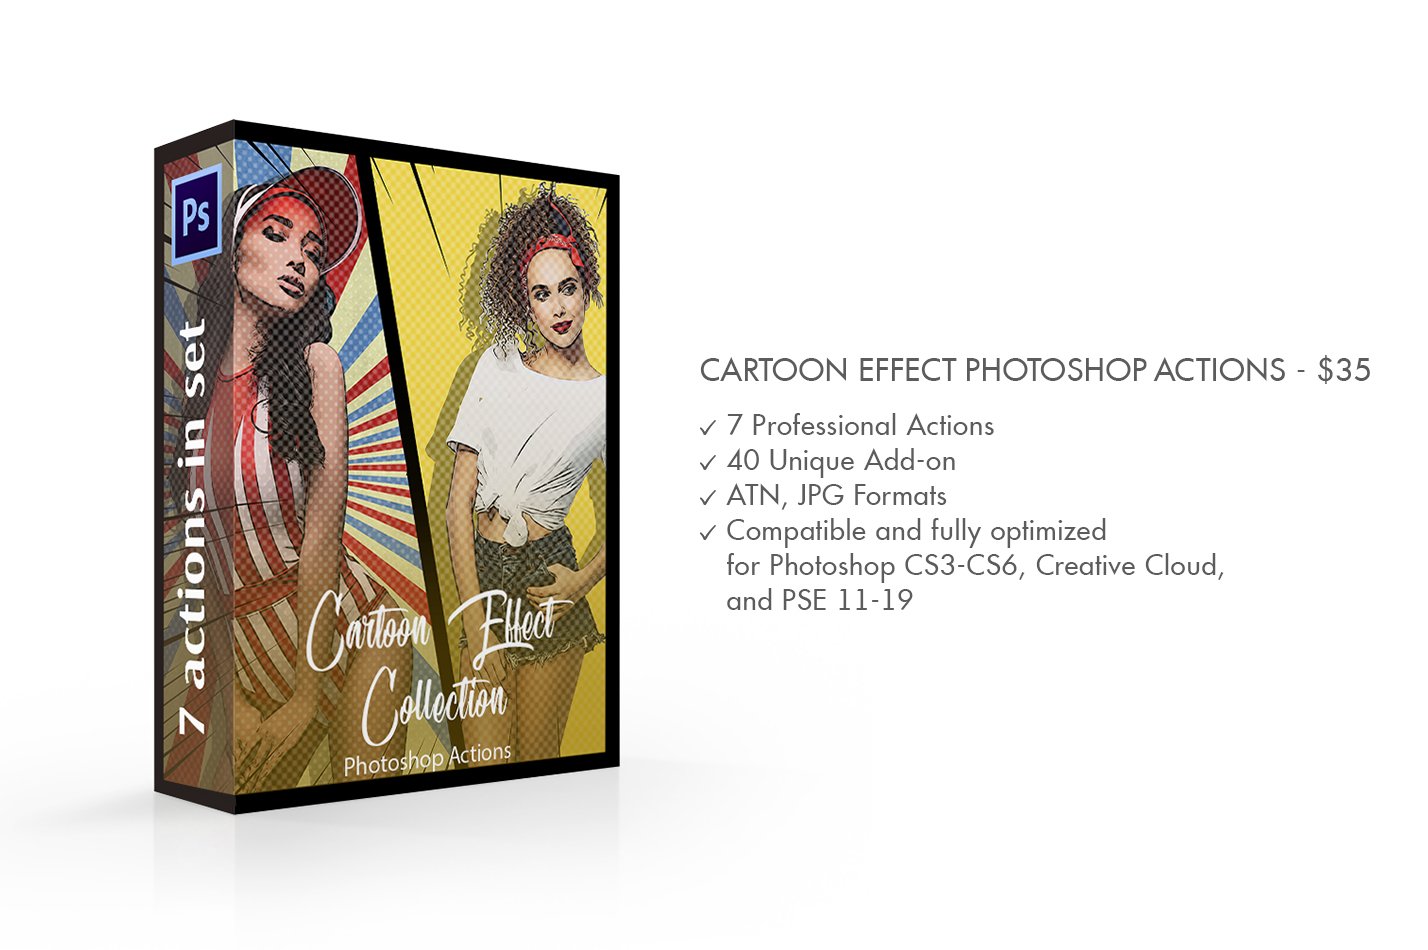 Cartoon Effect Photoshop Actionspreview image.